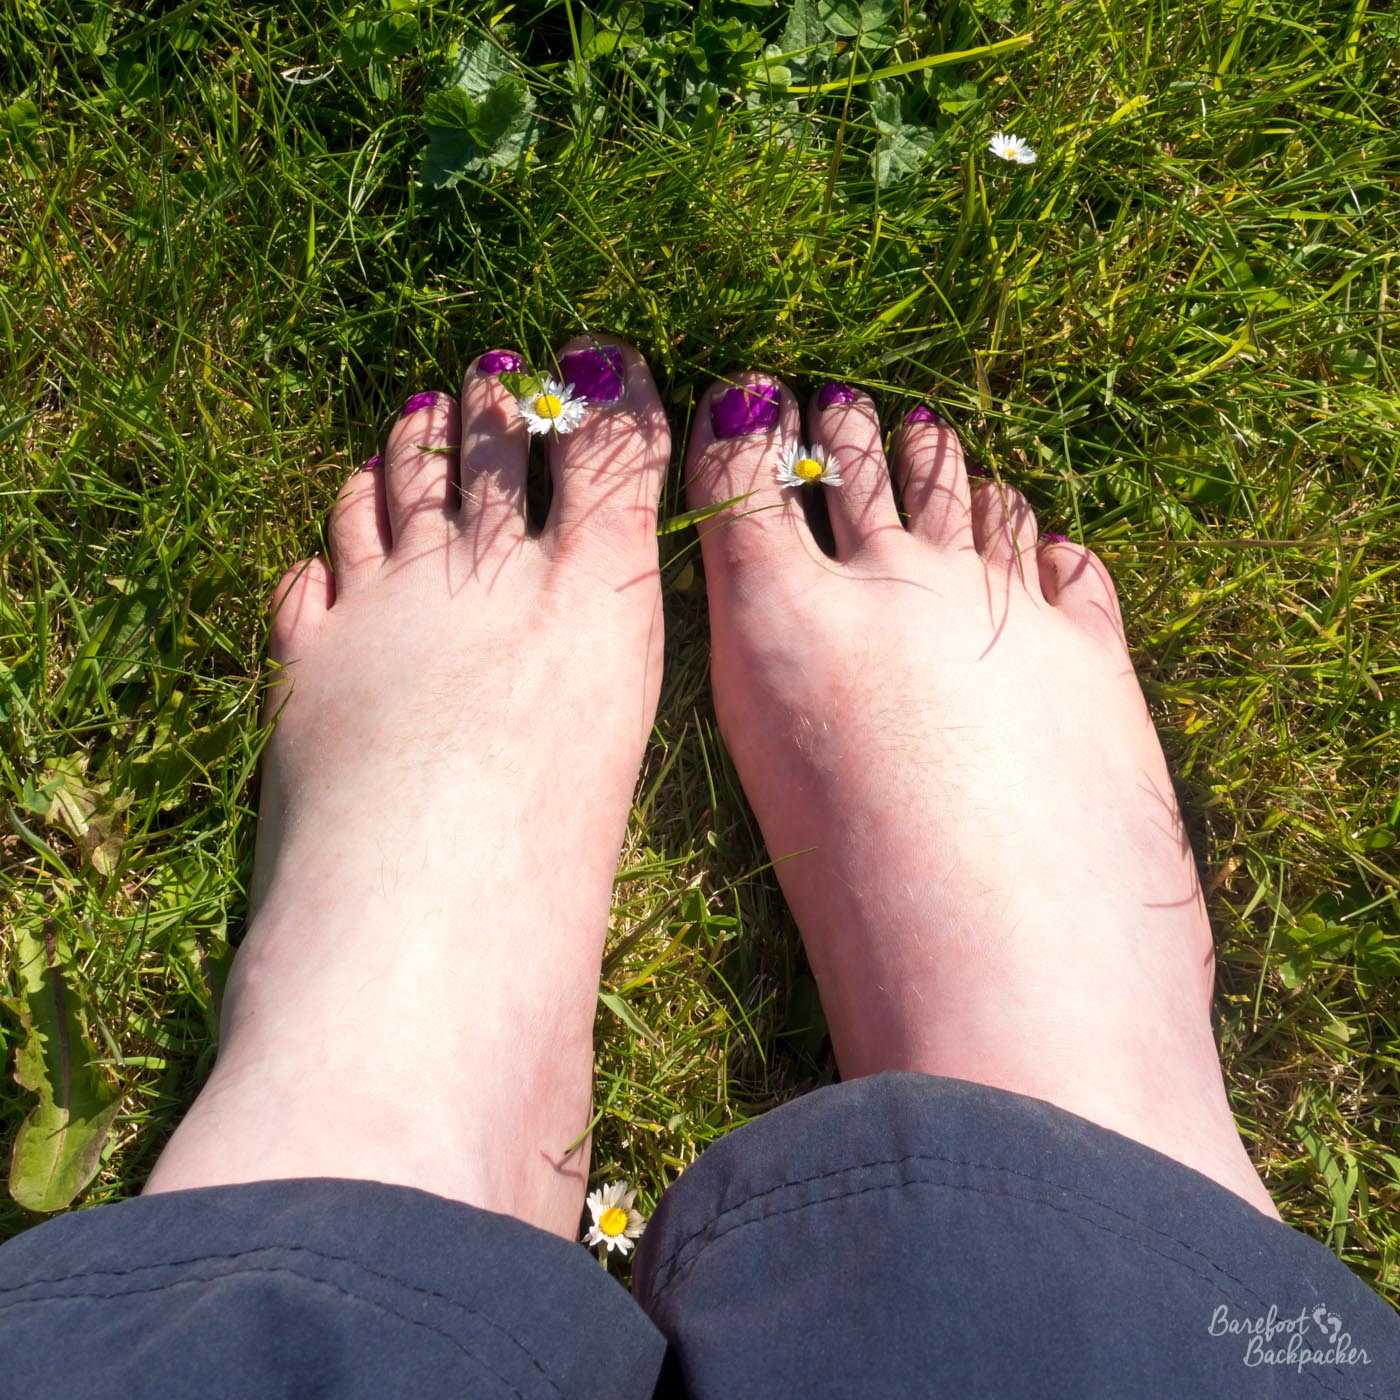 Picture taken looking down at two bare feet in the grass. Their toenails are painted in a vibrant purple, and there are daisies sliding between the big toes and the next toes on both feet.